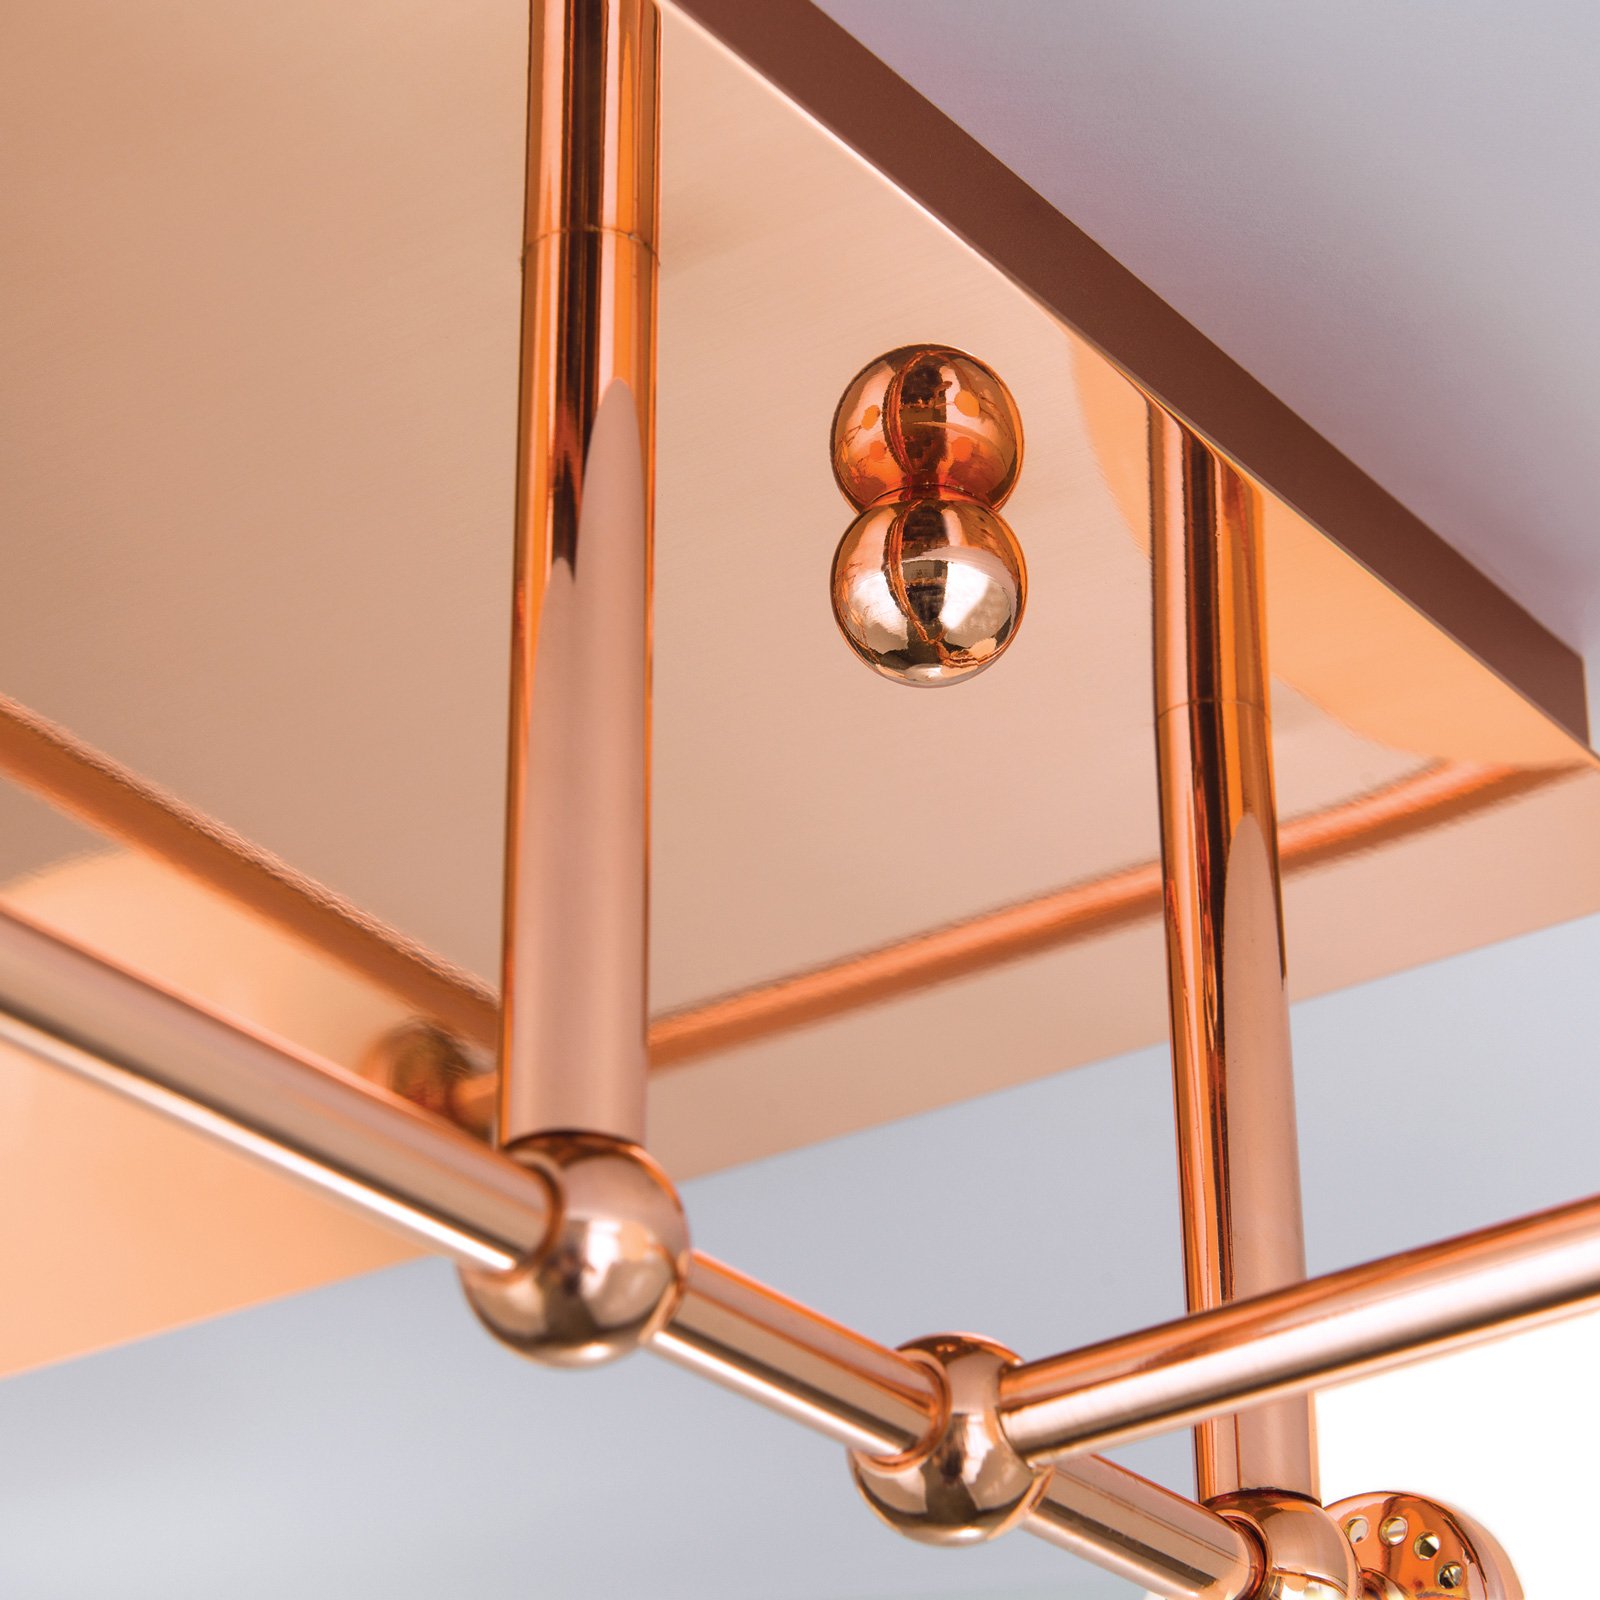 Pipes LED ceiling light in copper with glass balls